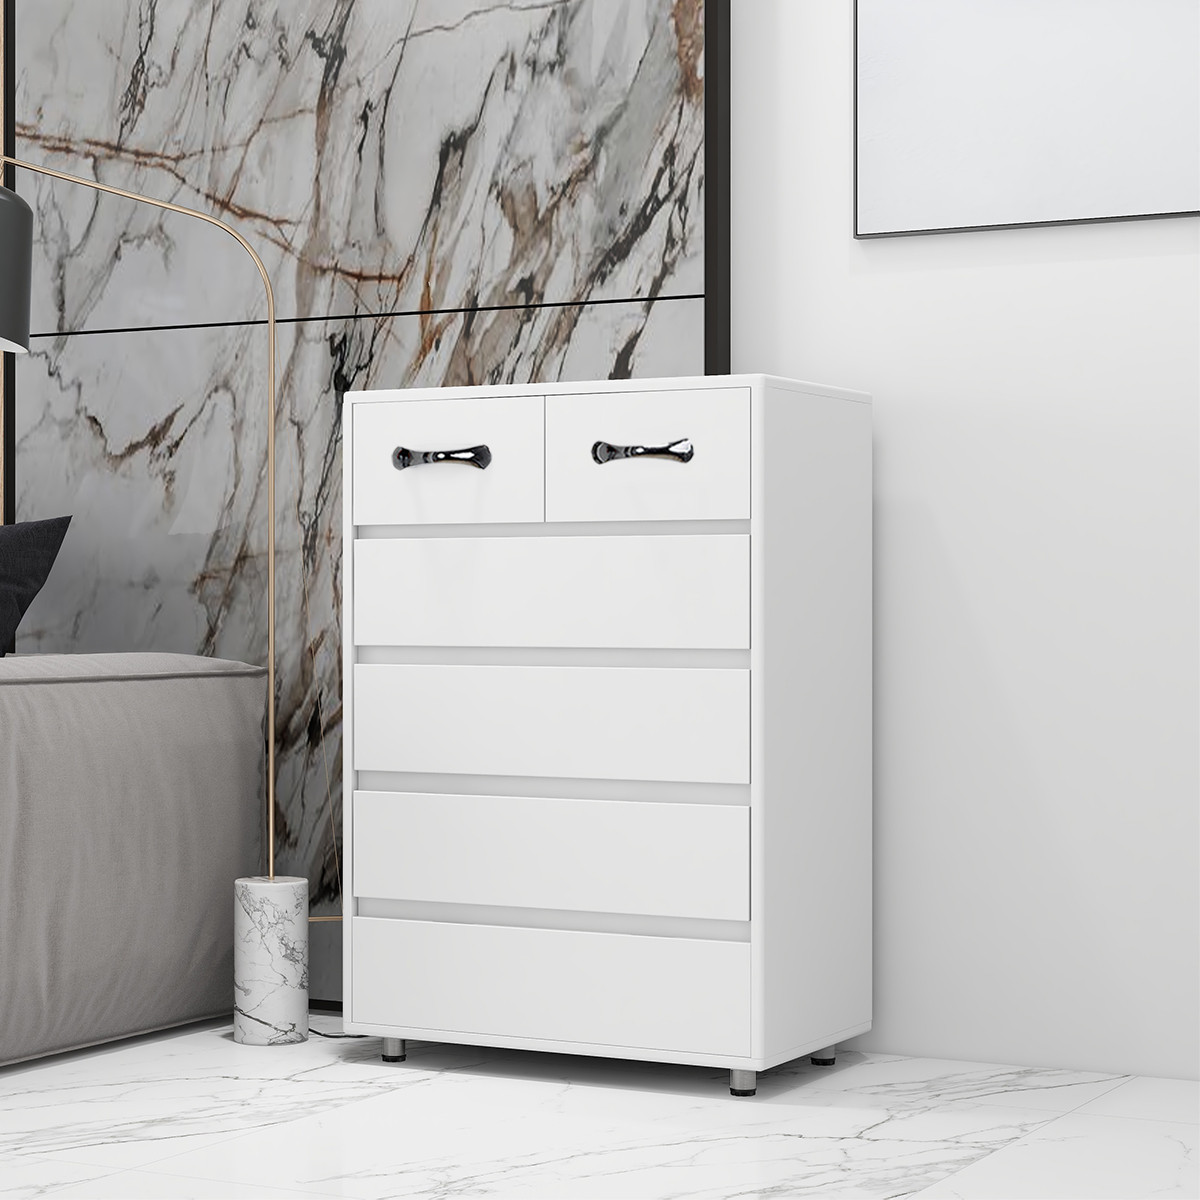 6 Drawer Dresser, URHOMEPRO Chest of Drawers Storage Organizer Nightstand, Wood Frame Drawer Chest with Steel Tube Legs, Bathroom Floor Cabinet, Living Room Office Bedroom Furniture, White, W12868 - image 3 of 10